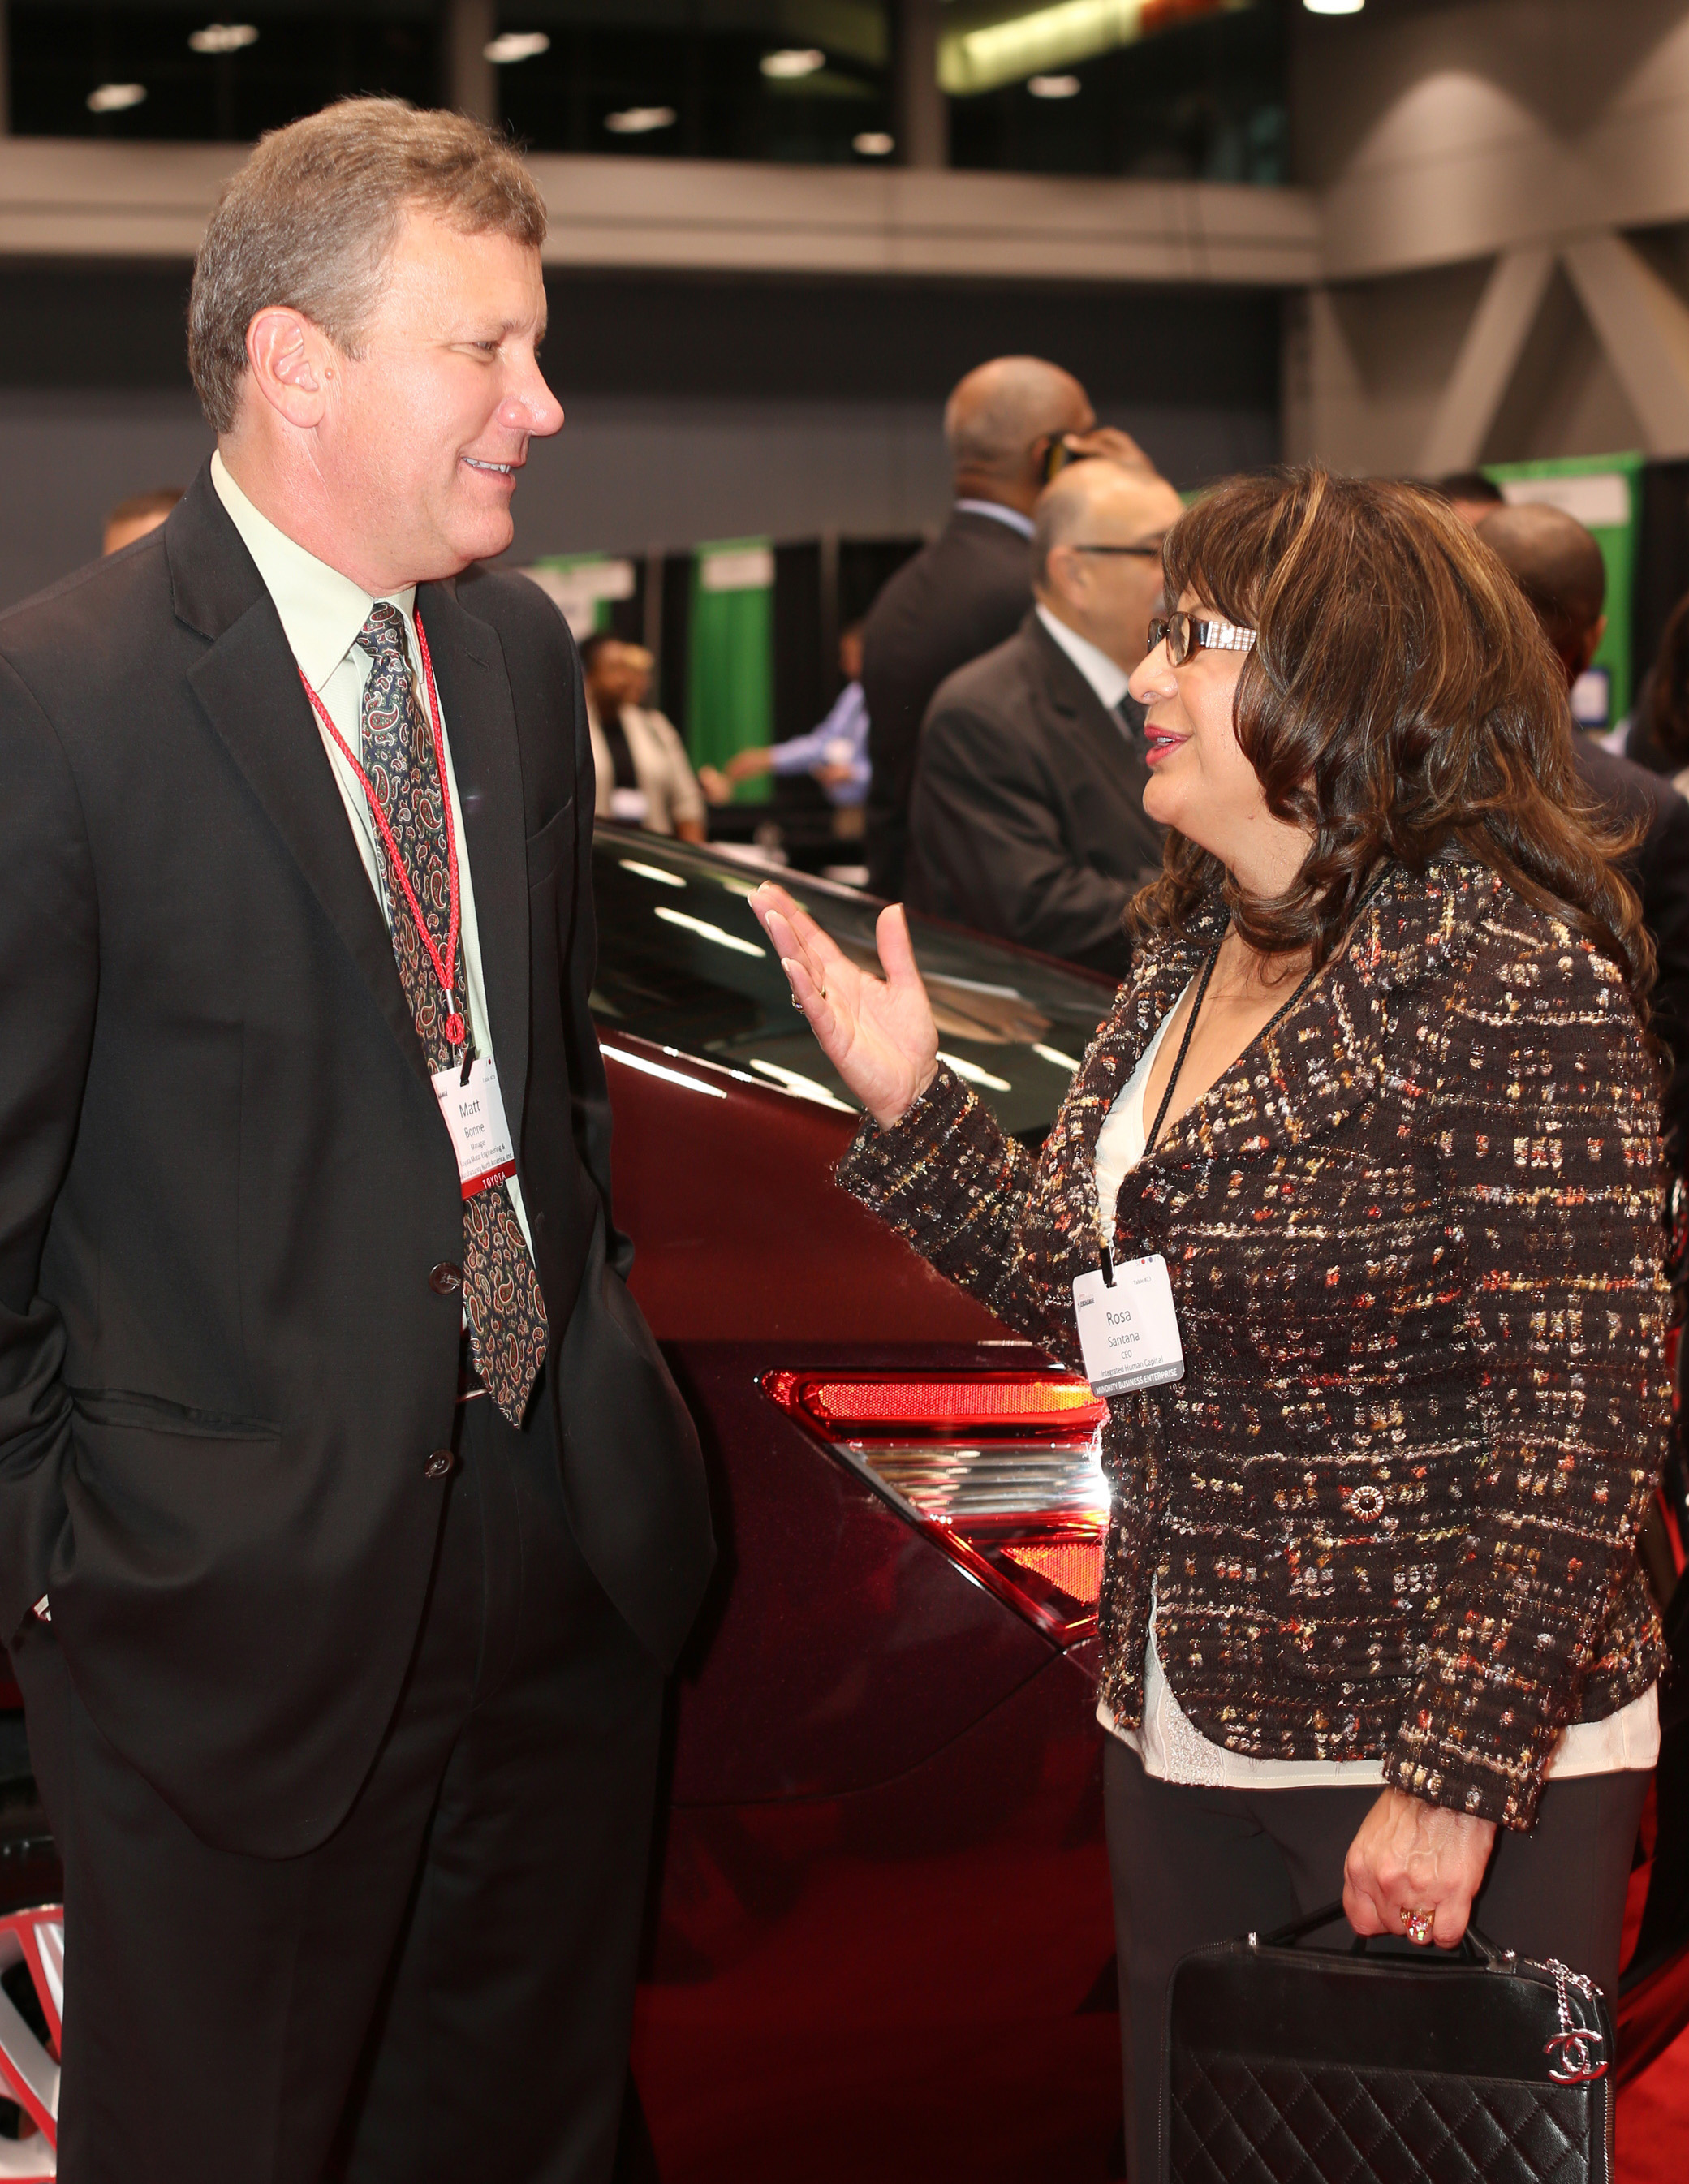 Rosa Santana, right, speaks with Matt Bonne, purchasing manager for TEMA, at the Toyota Opportunity Exchange. Santana’s Forma Automotive recently became the first Hispanic woman-owned direct supplier for Toyota.